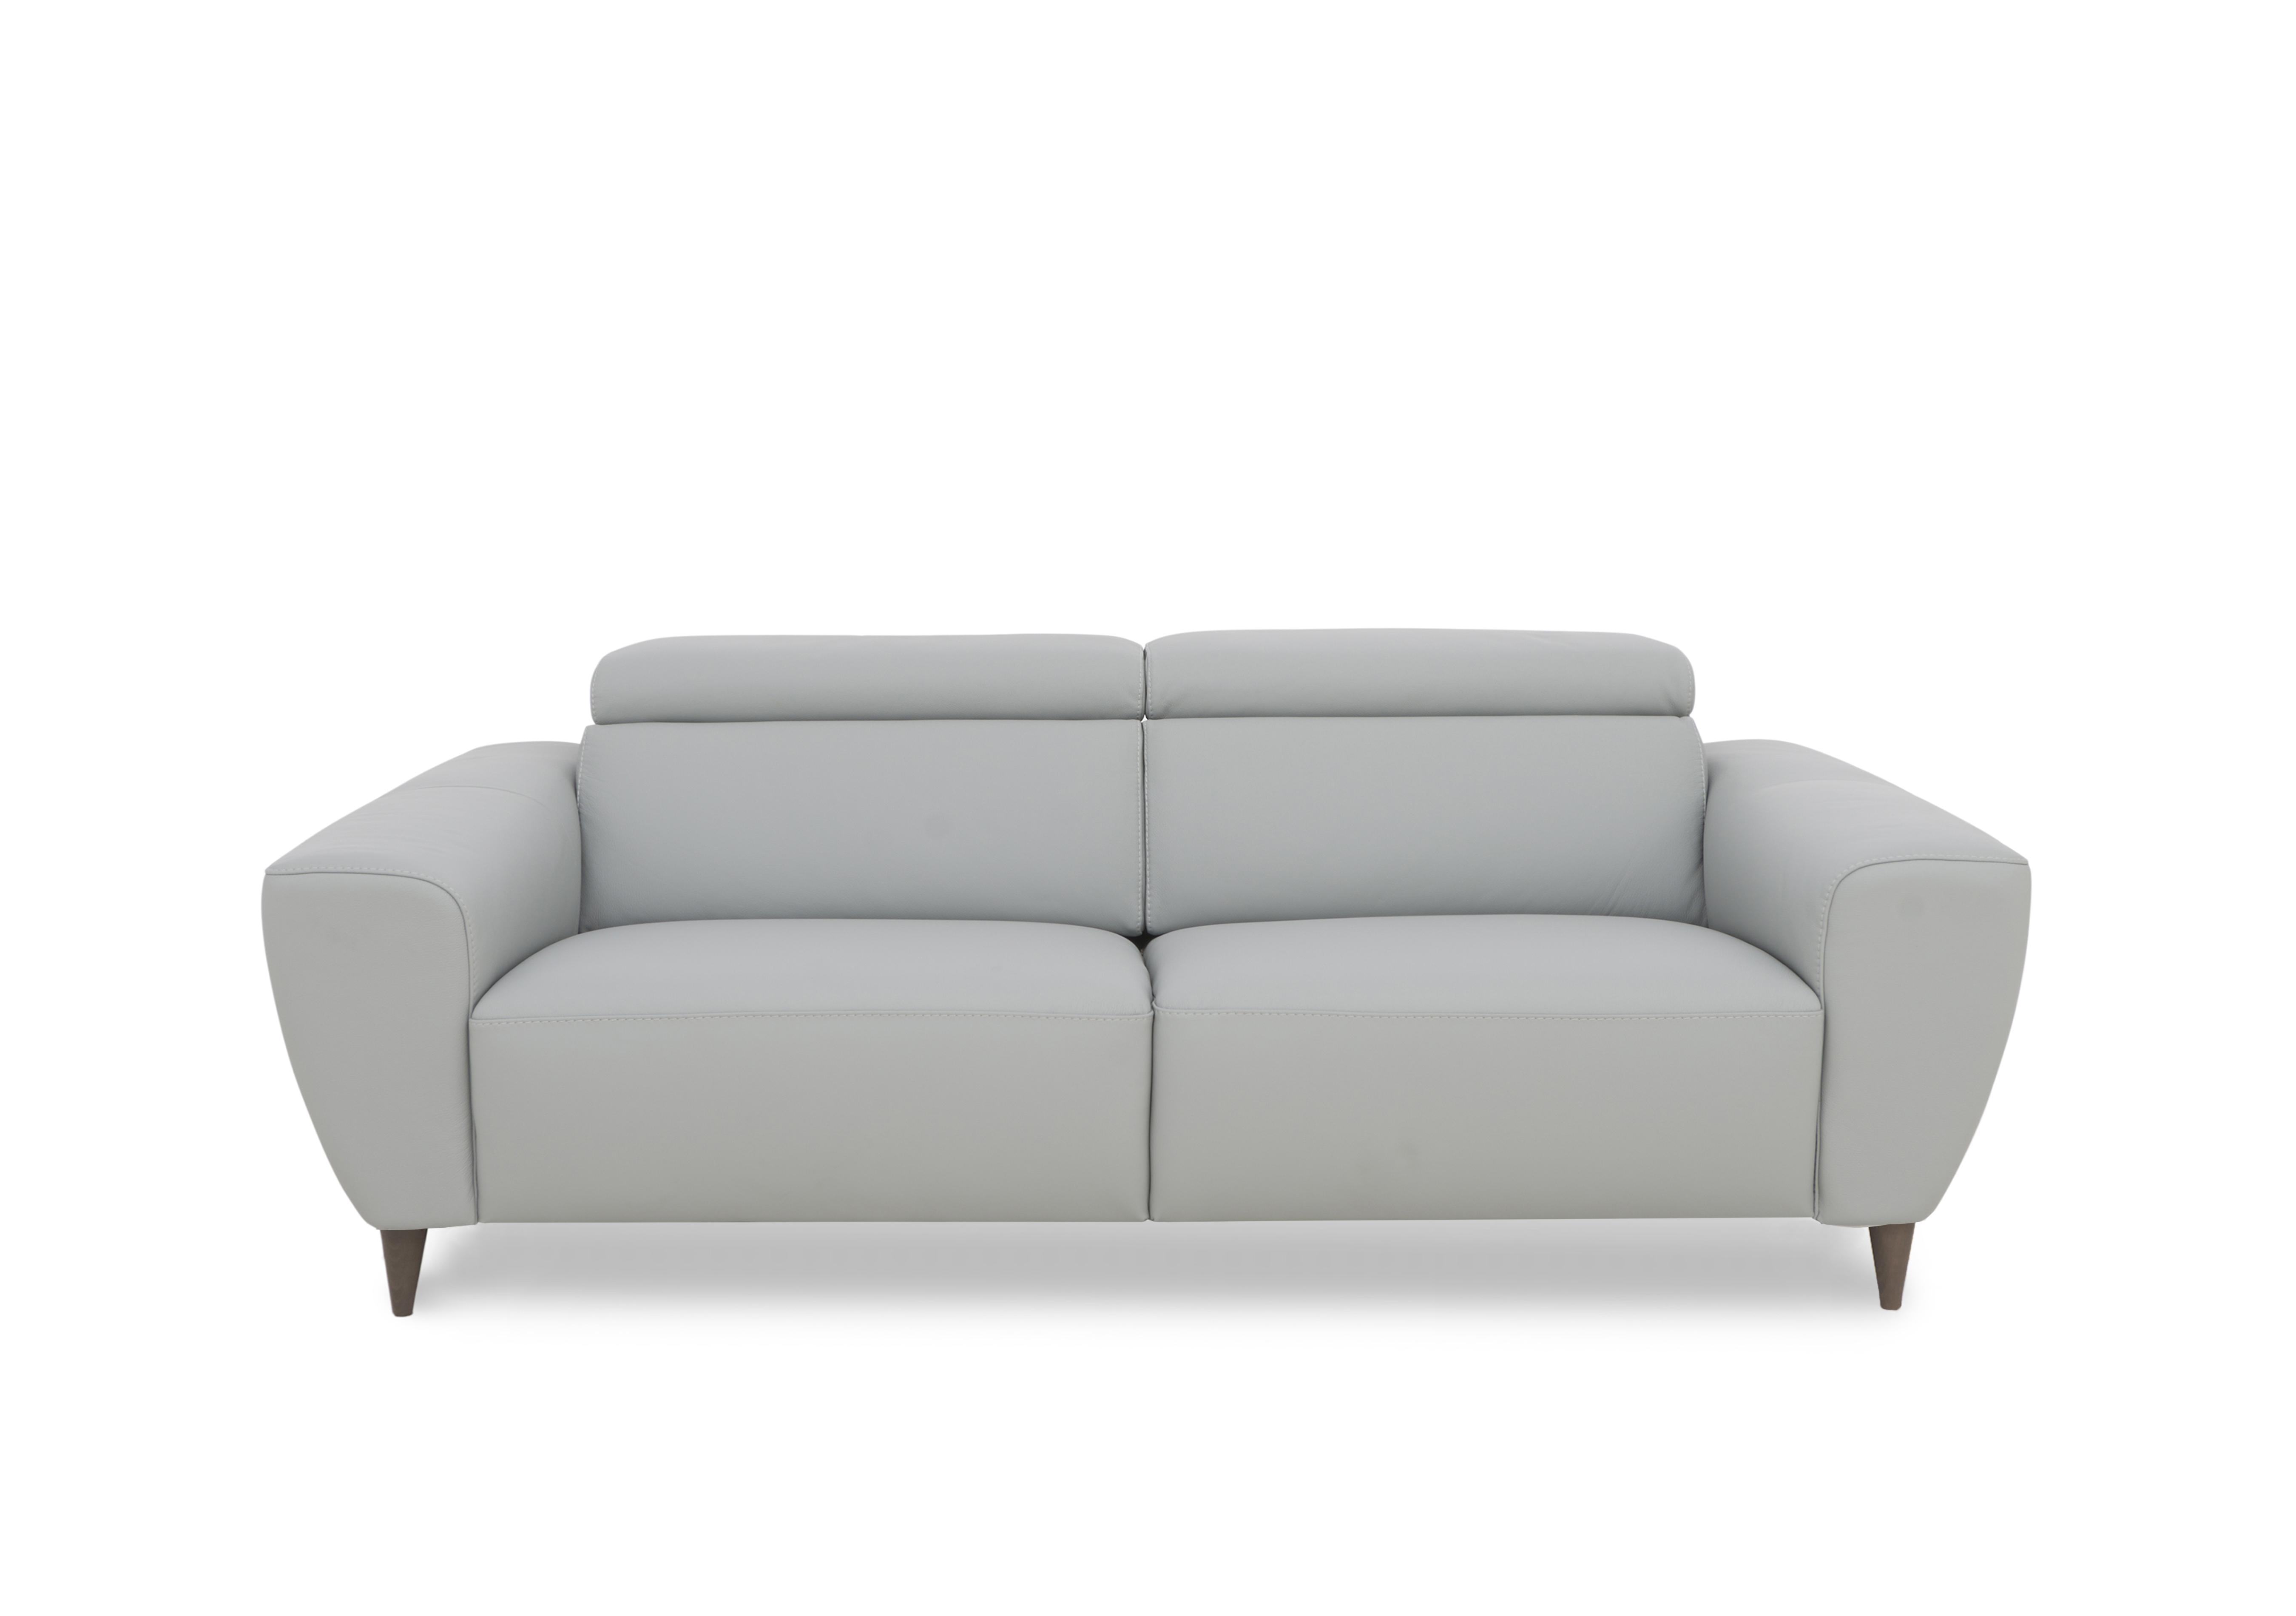 Milano 3 Seater Leather Sofa in 360 Torello Grig Allum To Ft on Furniture Village